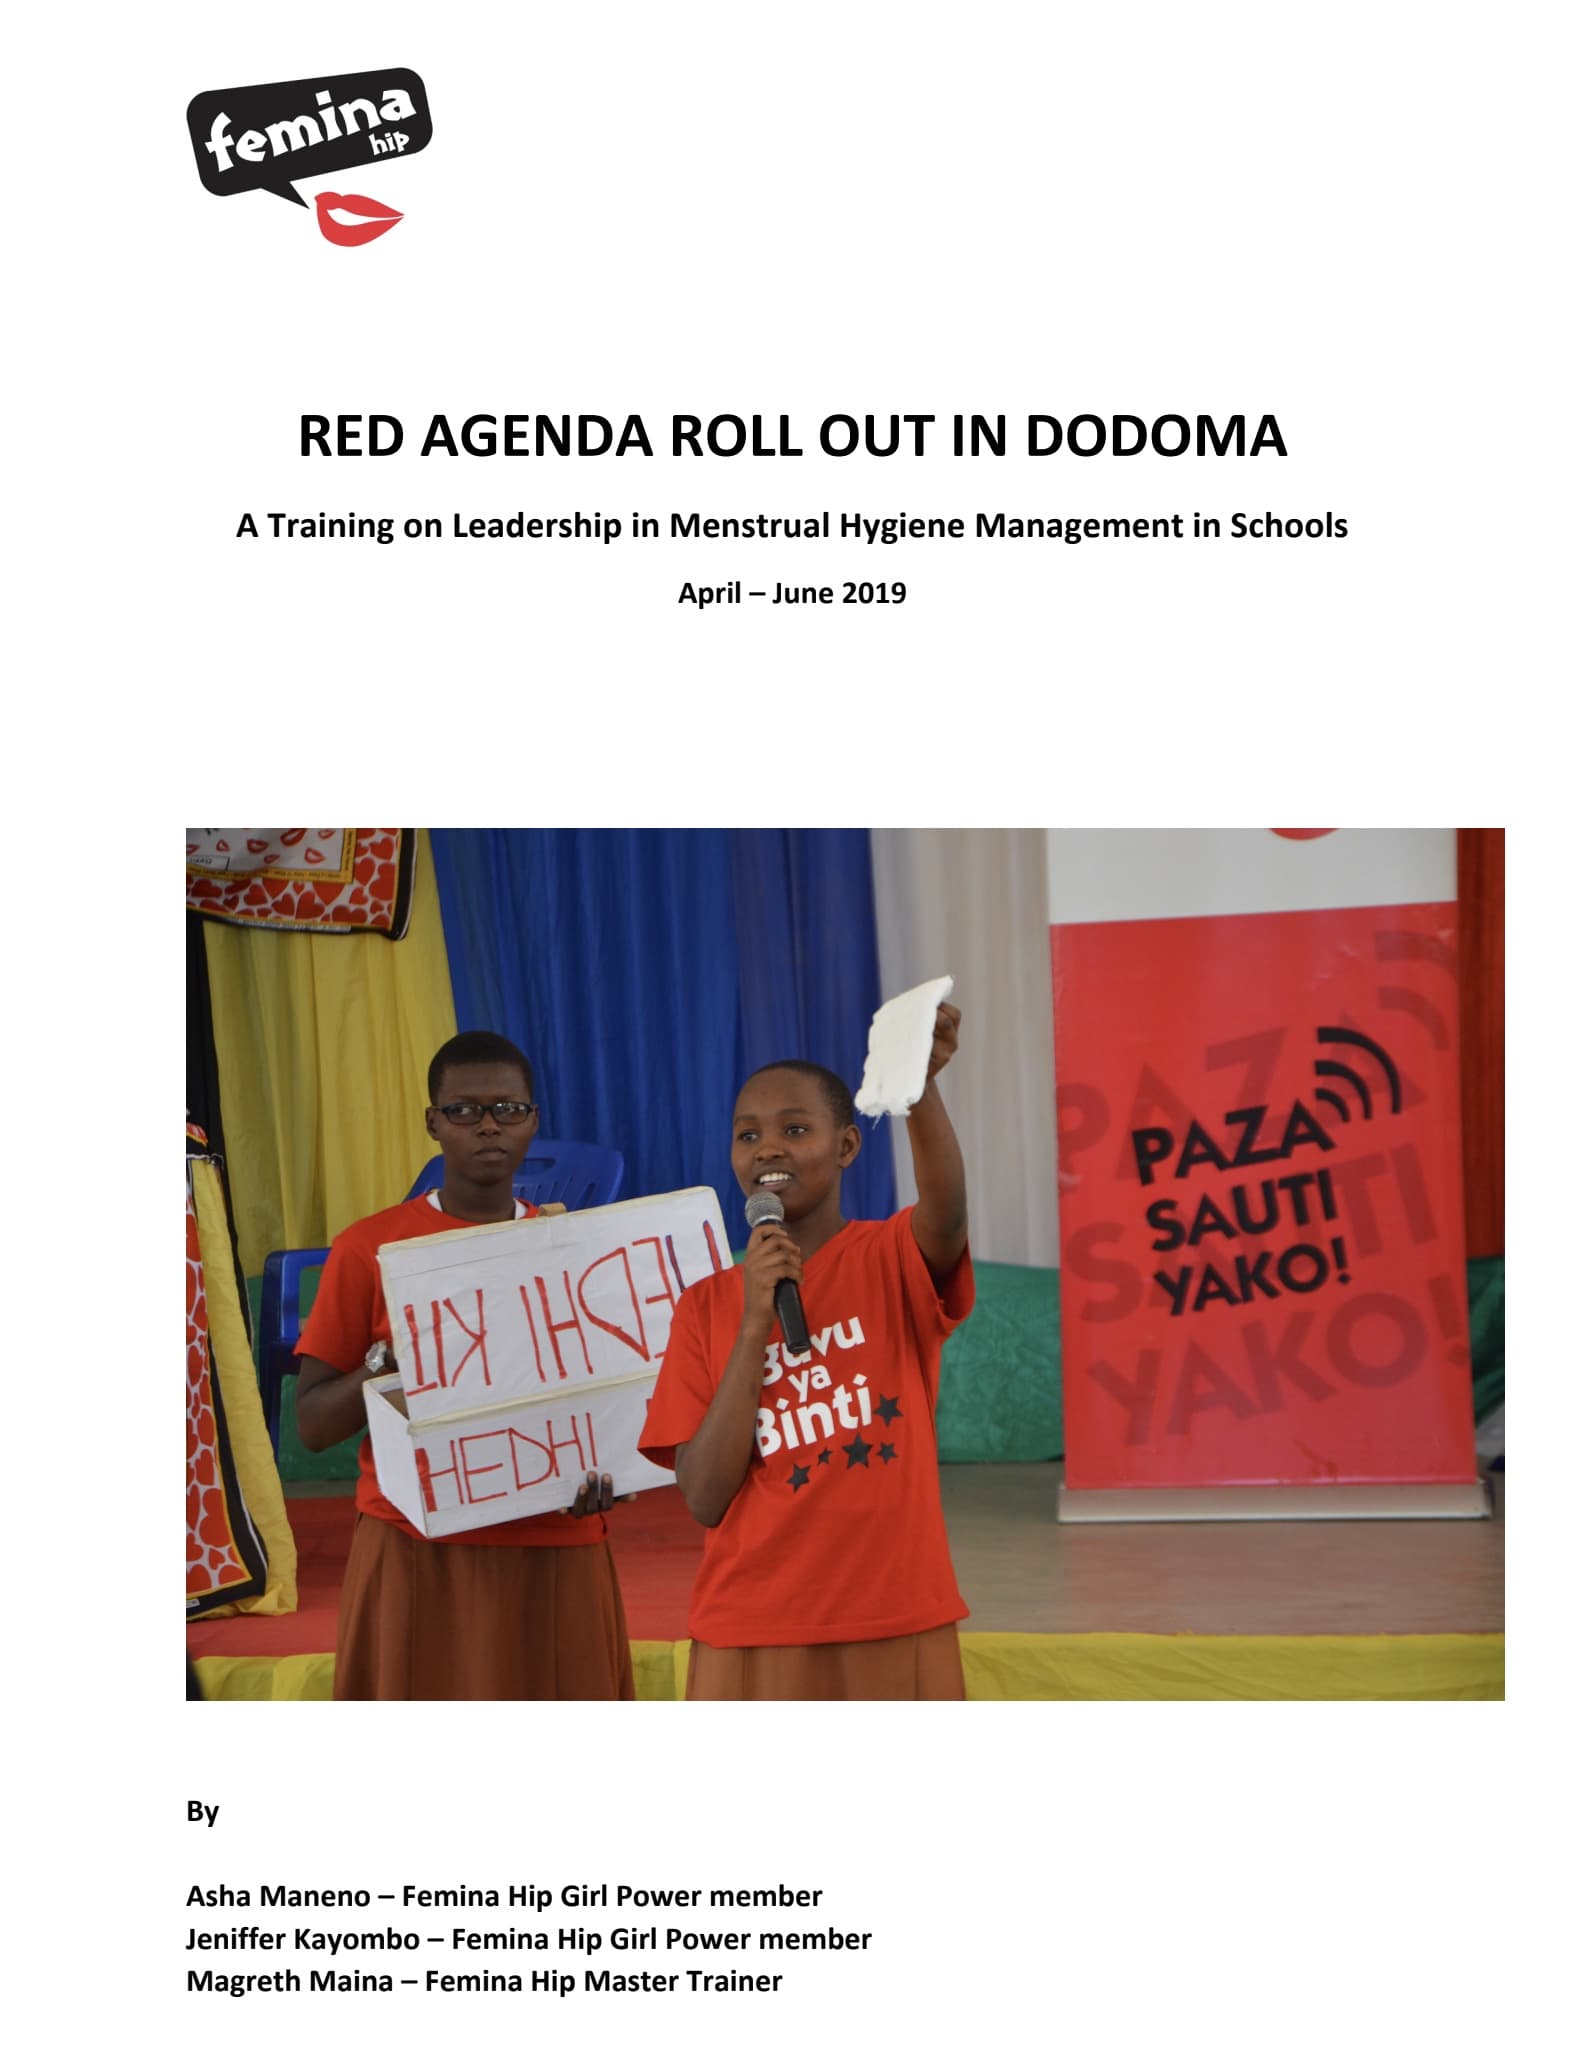 Red Agenda Roll Out Dodoma